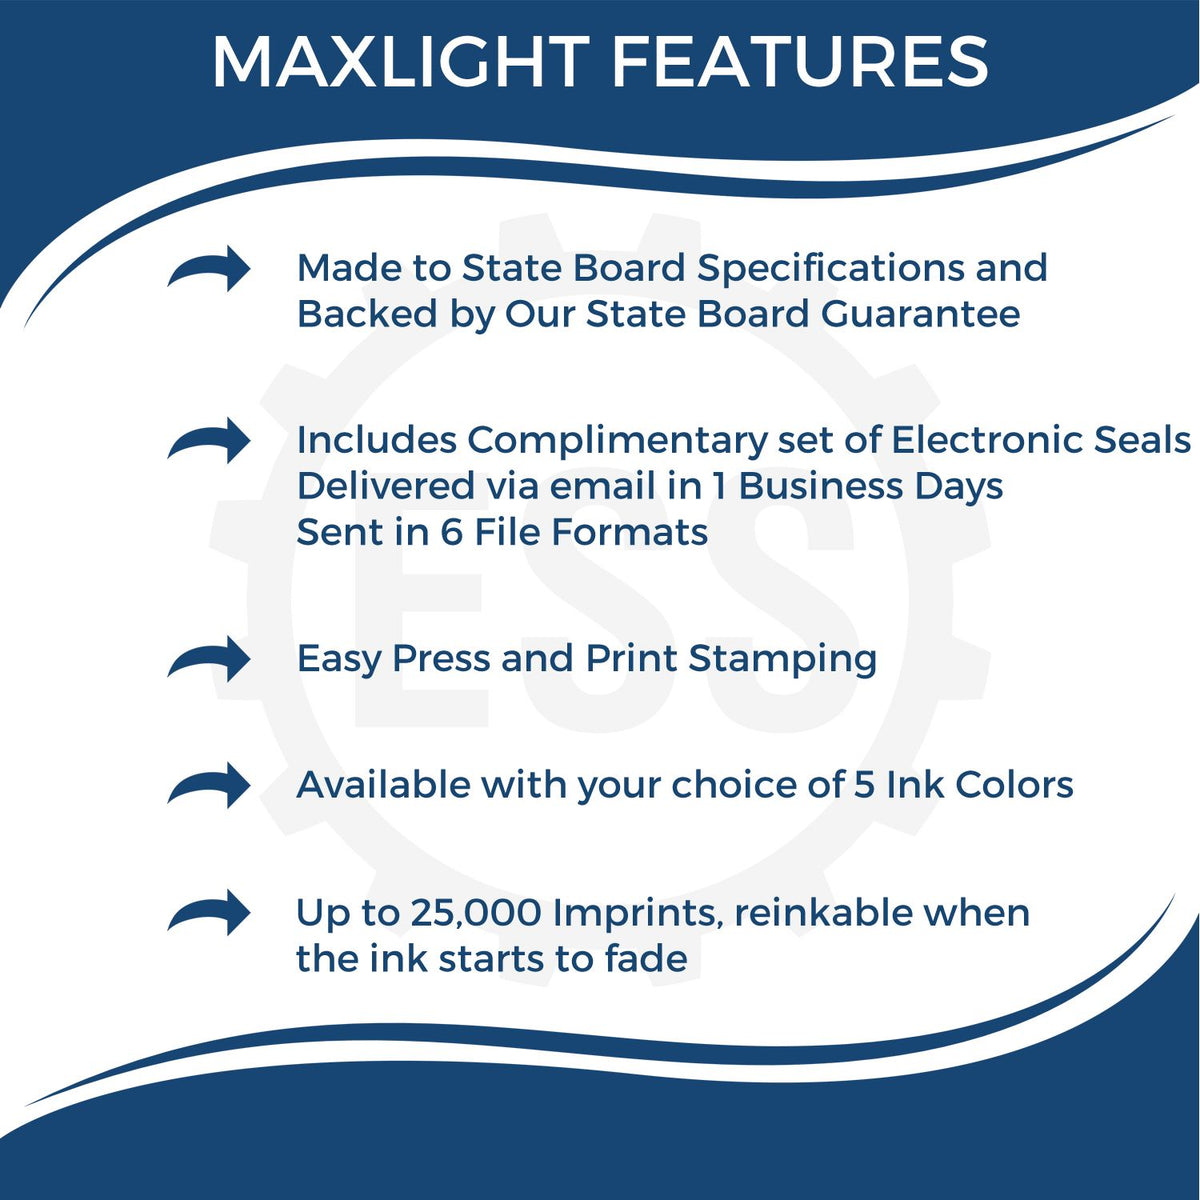 A picture of an infographic highlighting the selling points for the MaxLight Premium Pre-Inked Wisconsin State Seal Notarial Stamp